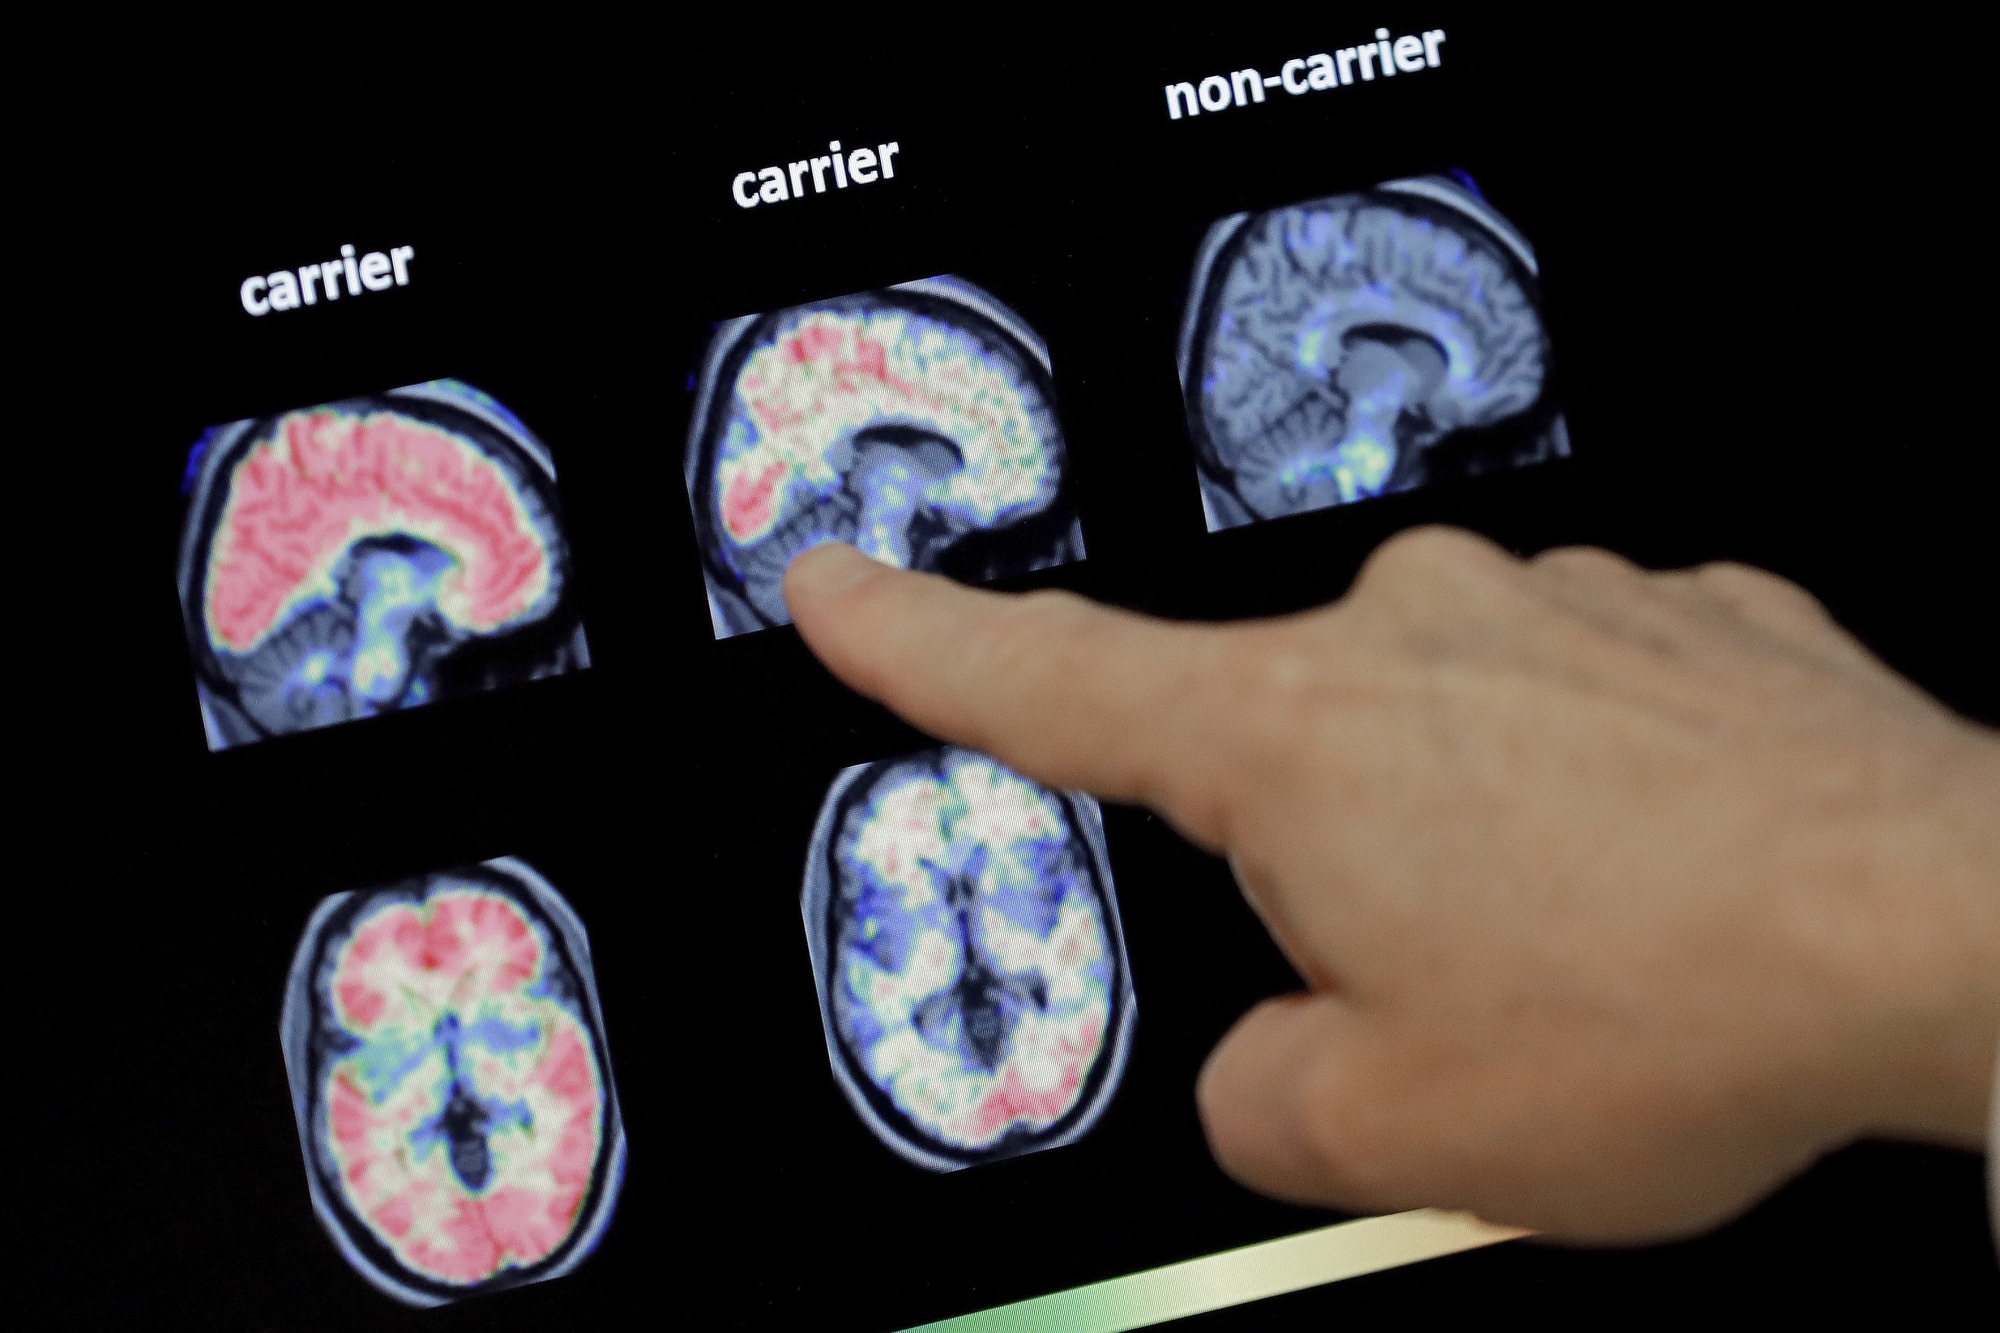 FILE - In this Aug. 14, 2018 file photo, a doctor looks at a PET brain scan at the Banner Alzheimers Institute in Phoenix. Two experimental drugs failed to prevent or slow mental decline in a study of people who are virtually destined to develop Alzheimer's disease at a relatively young age because of rare gene flaws. The results announced Monday, Feb. 10, 2020, are another disappointment for the approach that scientists have focused on for many years -- trying to remove a harmful protein that builds up in the brains of people with the disease. (AP Photo/Matt York, File)